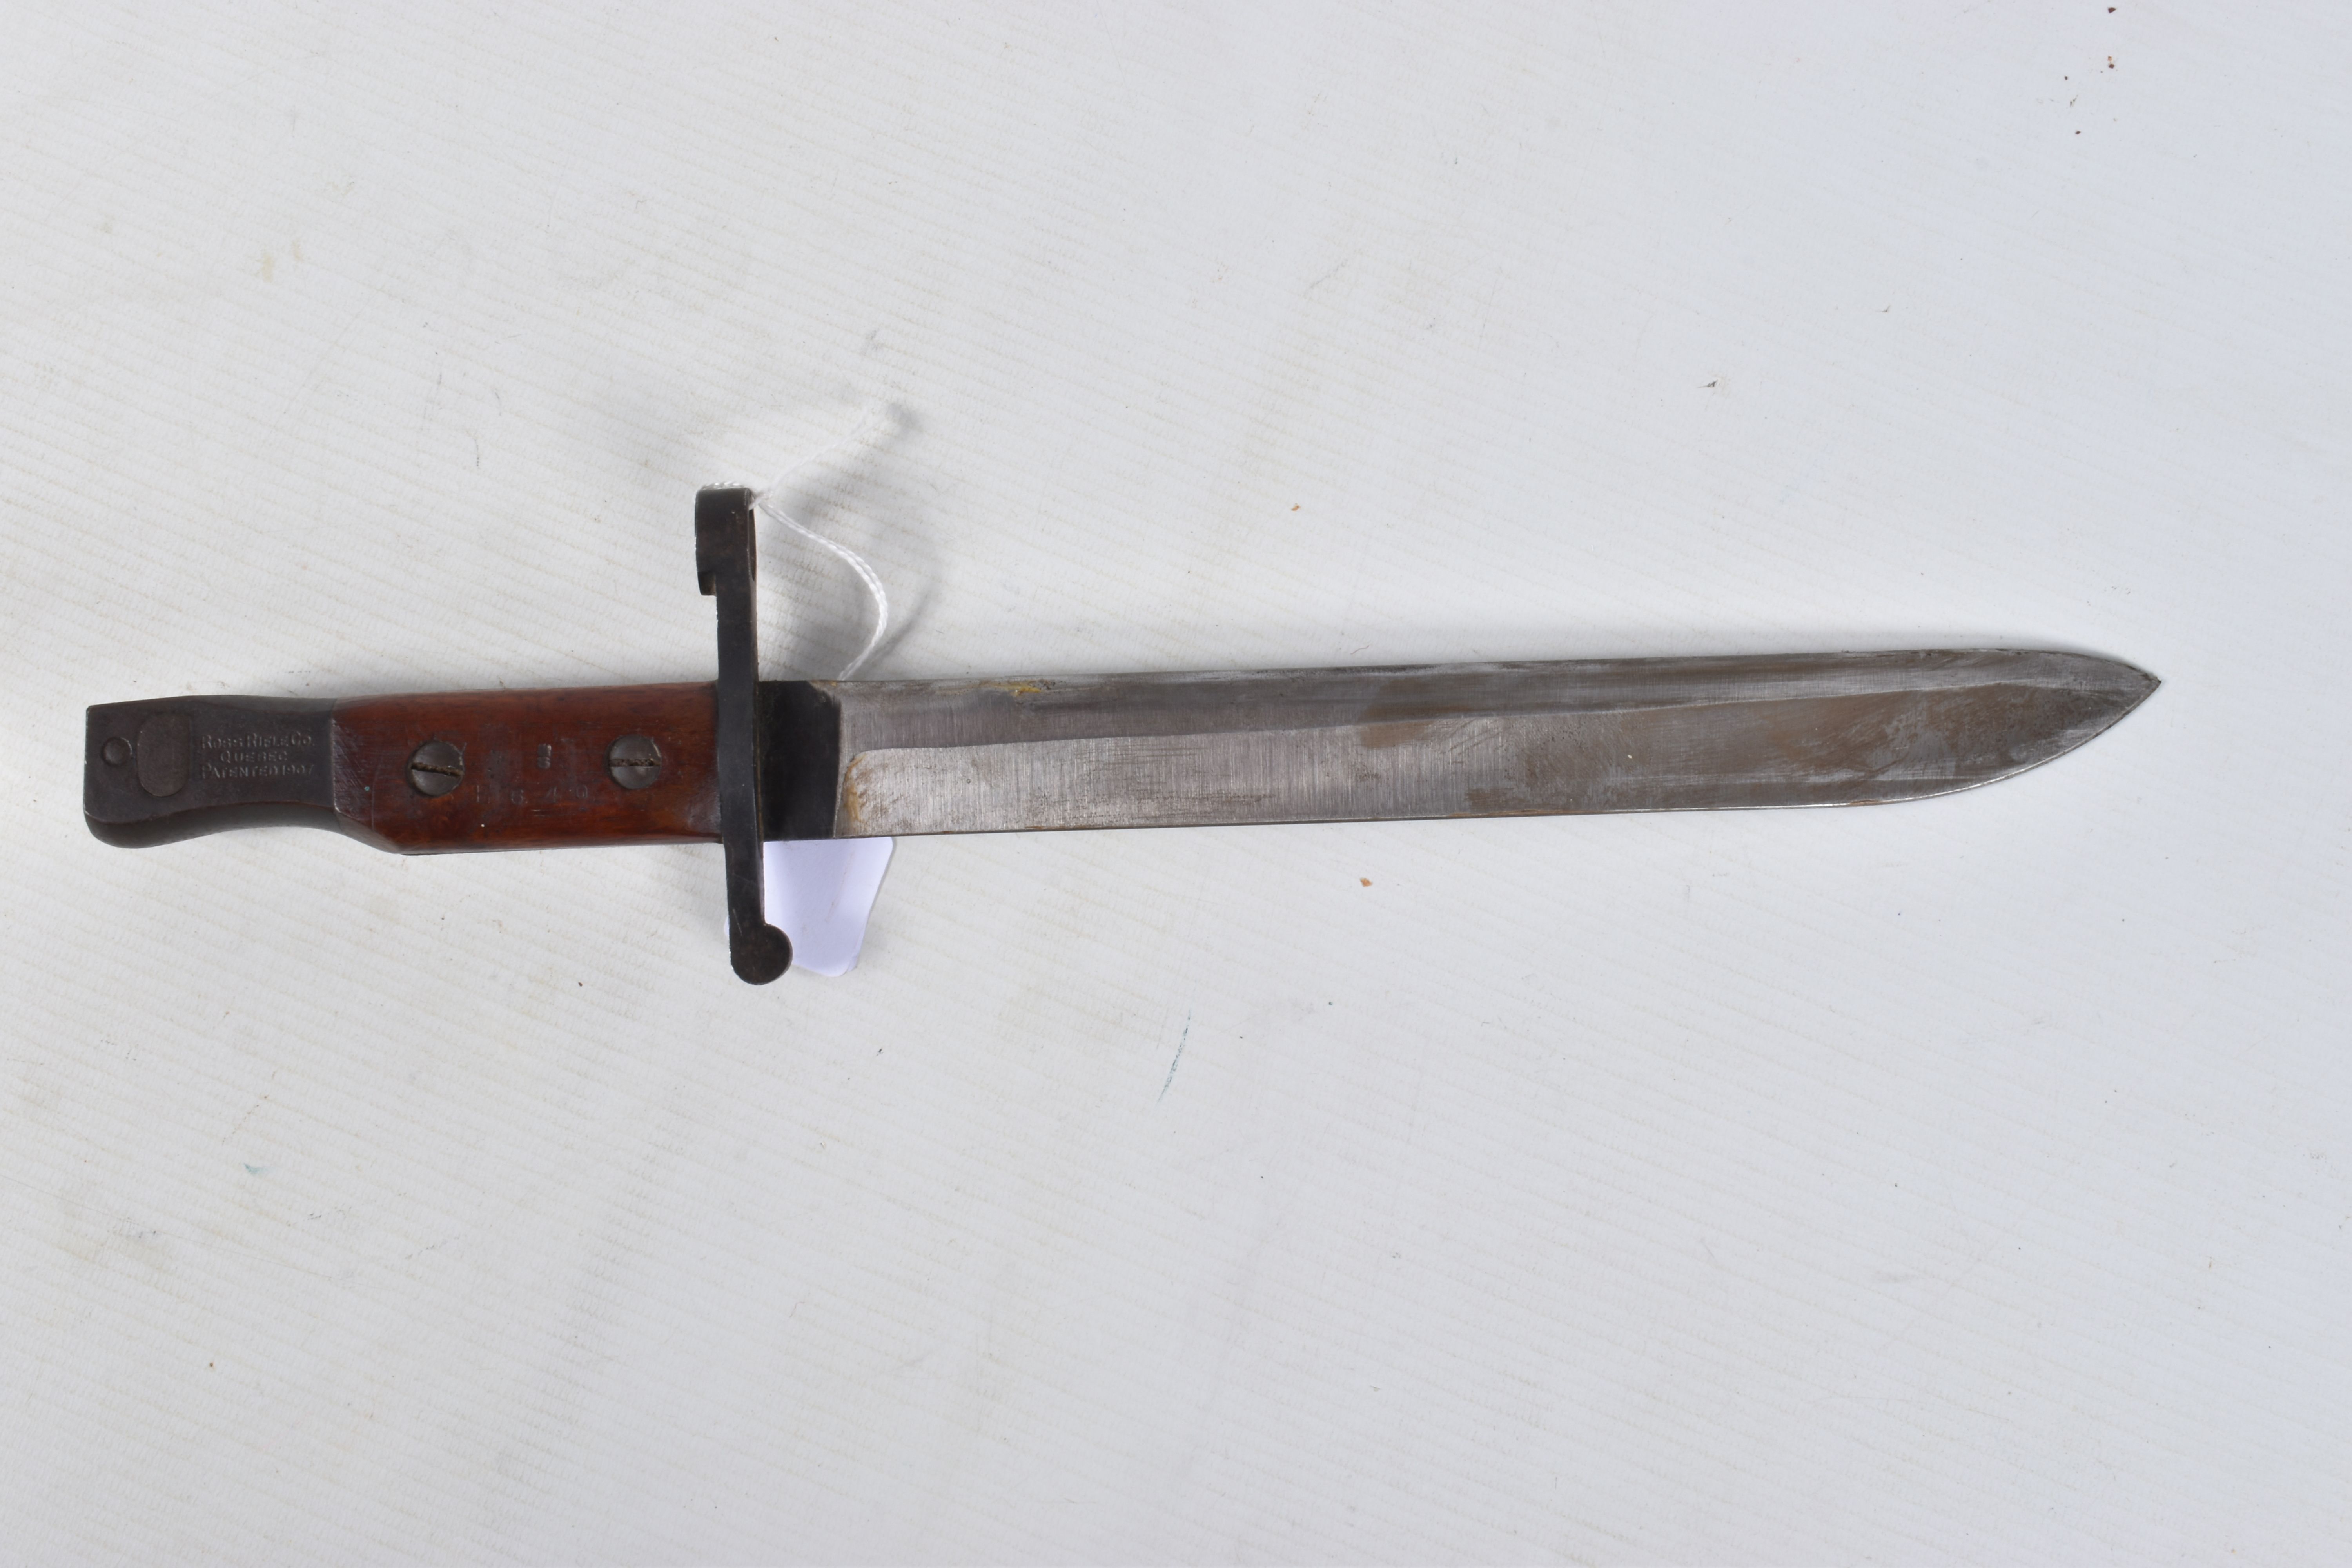 A 1907 PATTERN CANADIAN ROSS RIFLE BAYONET, the blade us unmarked but the handle has 48-H on one - Image 11 of 16